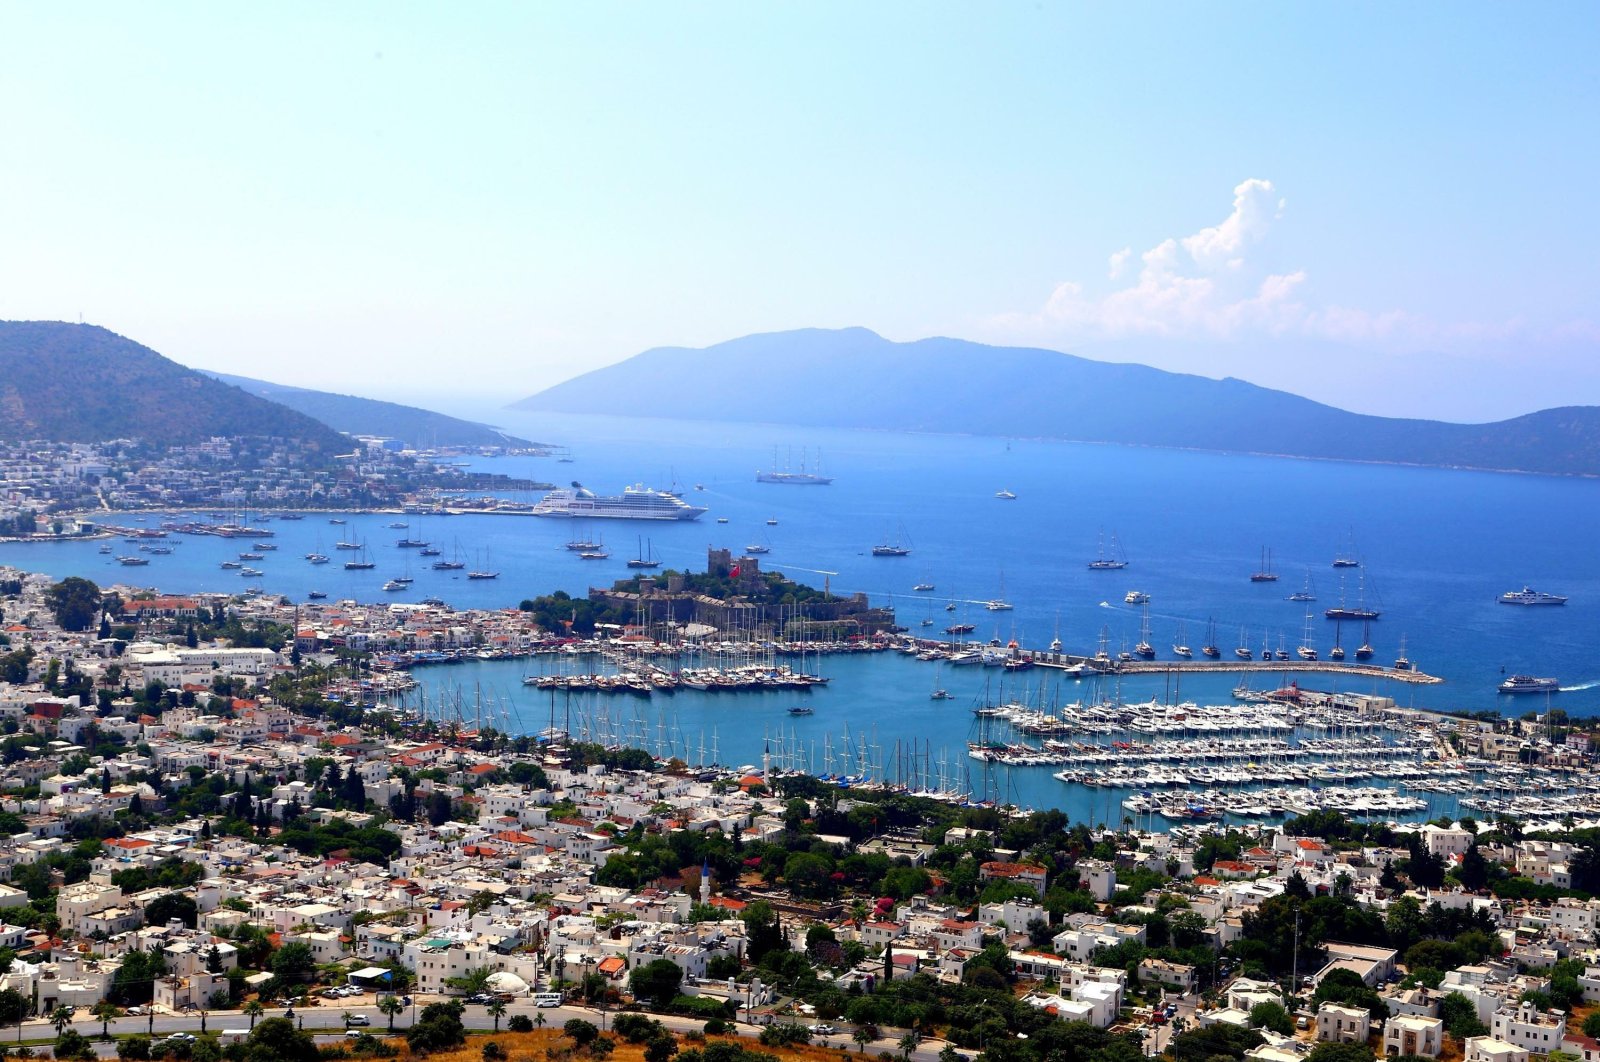 A view of the Aegean resort town of Bodrum, Turkey. (DHA Photo)